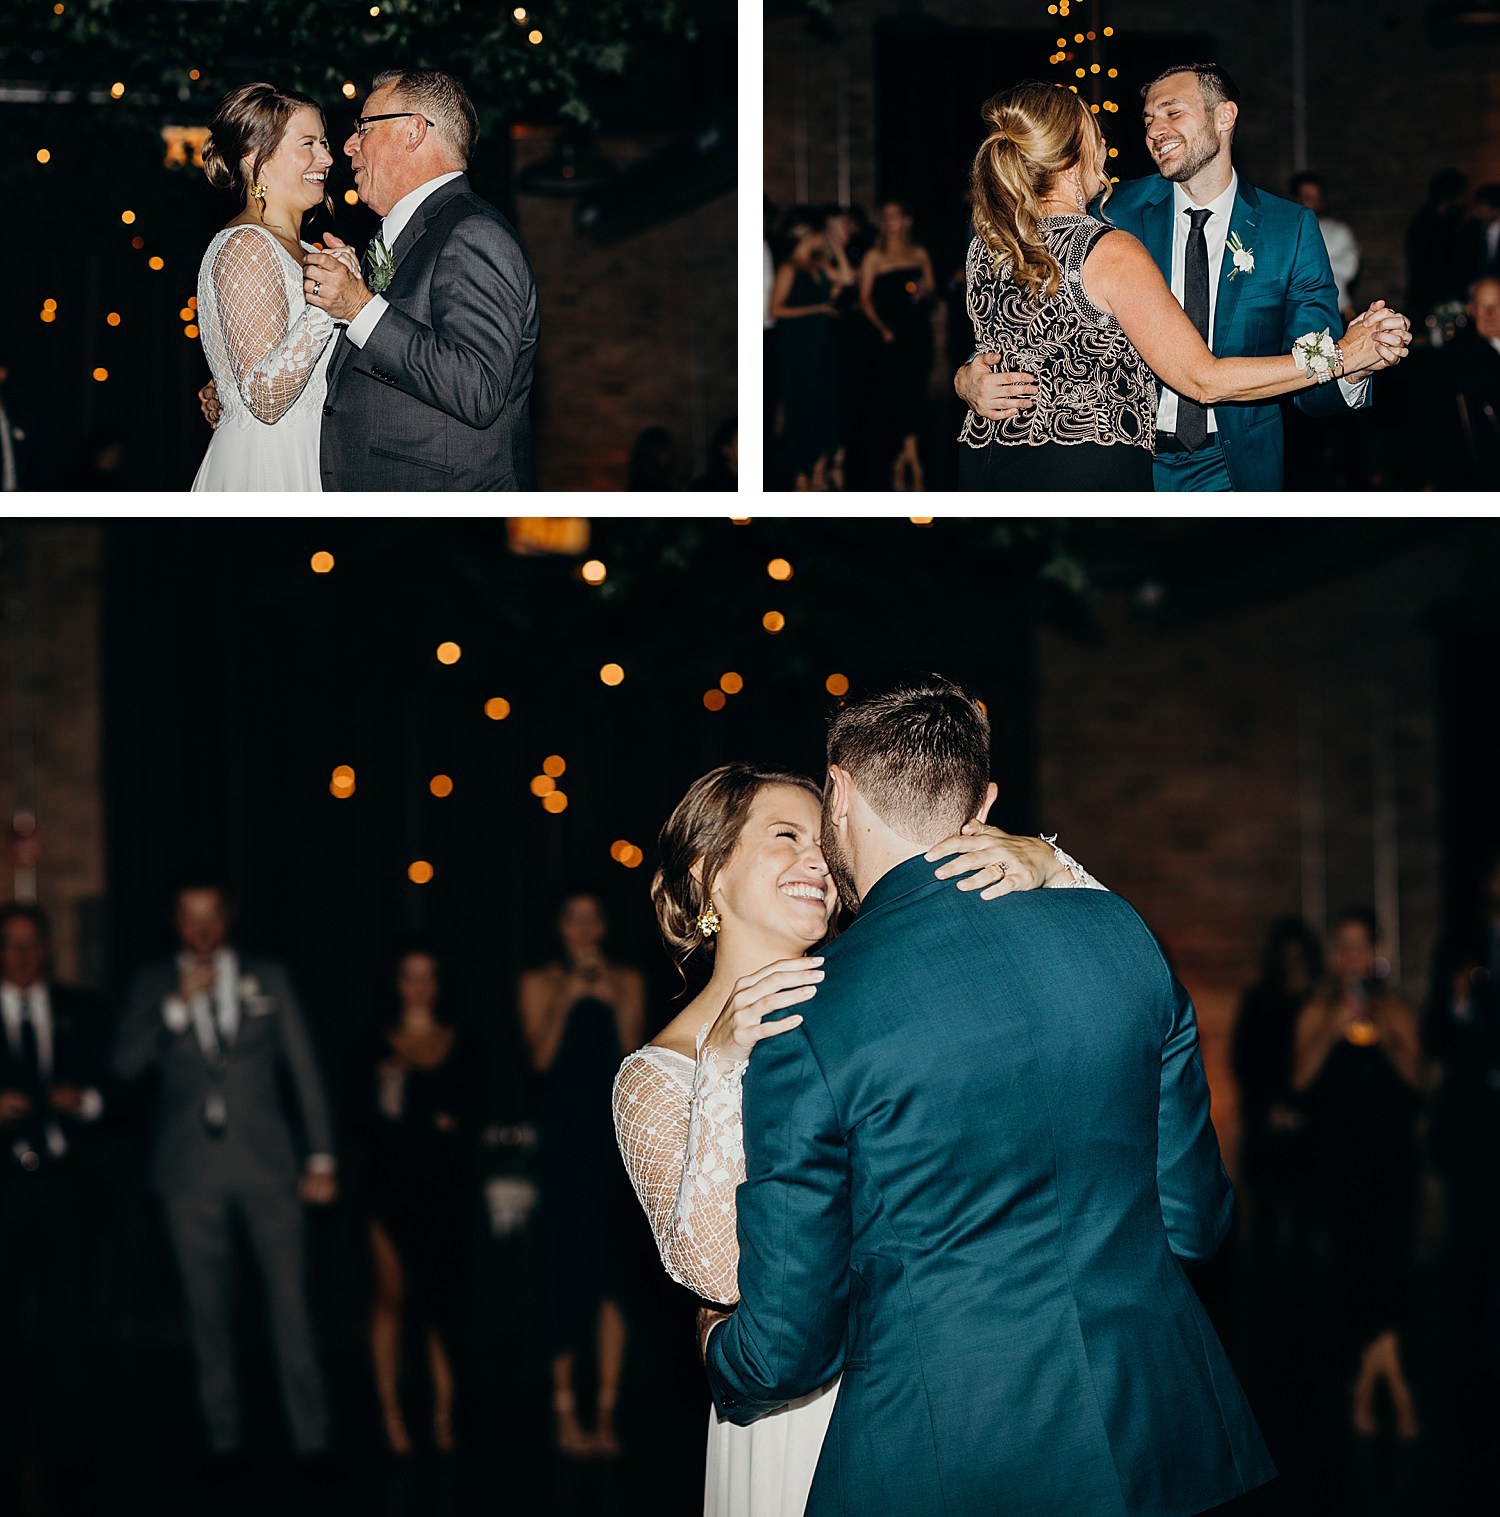 Boho Industrial Wedding at Morgan Manufacturing planned LK Events in Chicago